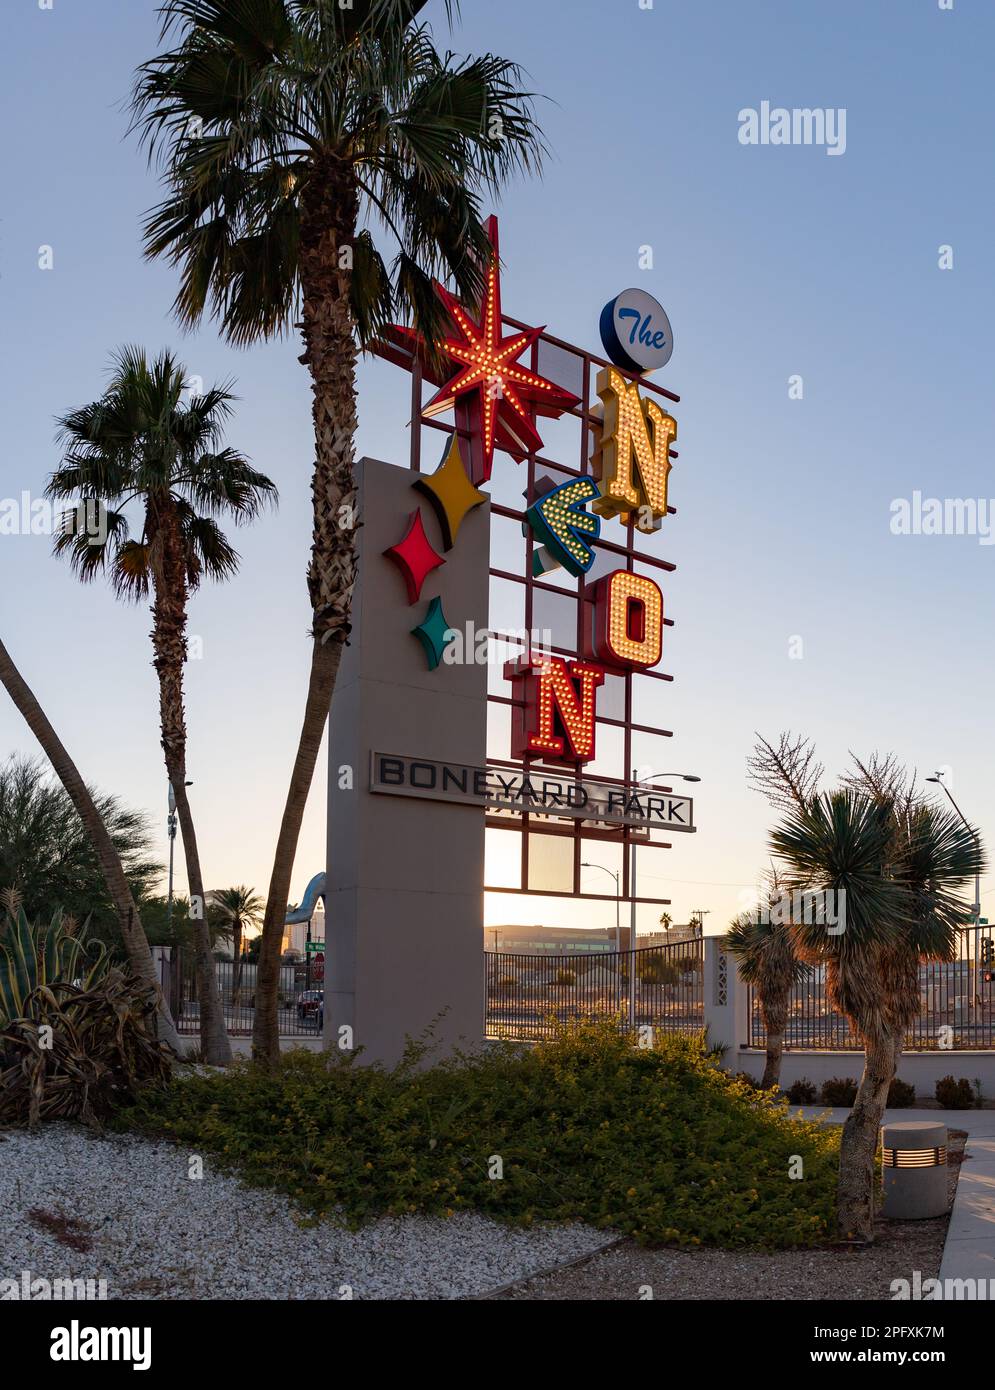 A picture of the colorful neon sign at the Boneyard Park. Stock Photo